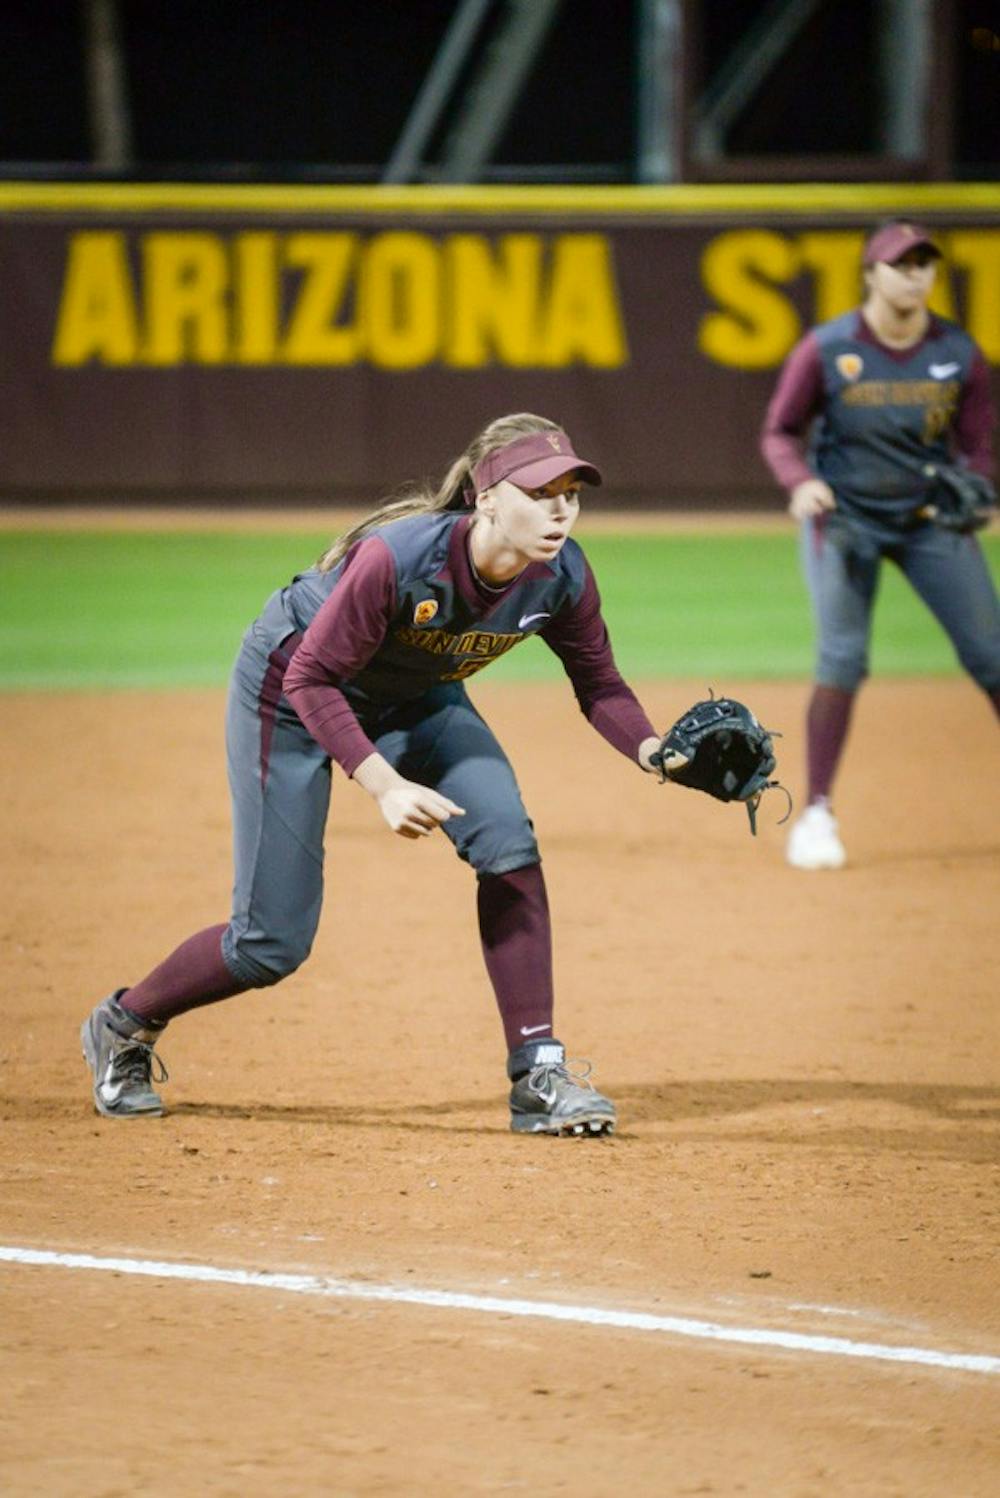 Senior third baseman Haley Steele anticipates the bunt in the second game of a Saturday night doubleheader on Feb. 21, 2015, in Tempe. The Sun Devils would secure a 14-0 victory in only five innings. (J. Bauer-Leffler/The State Press)